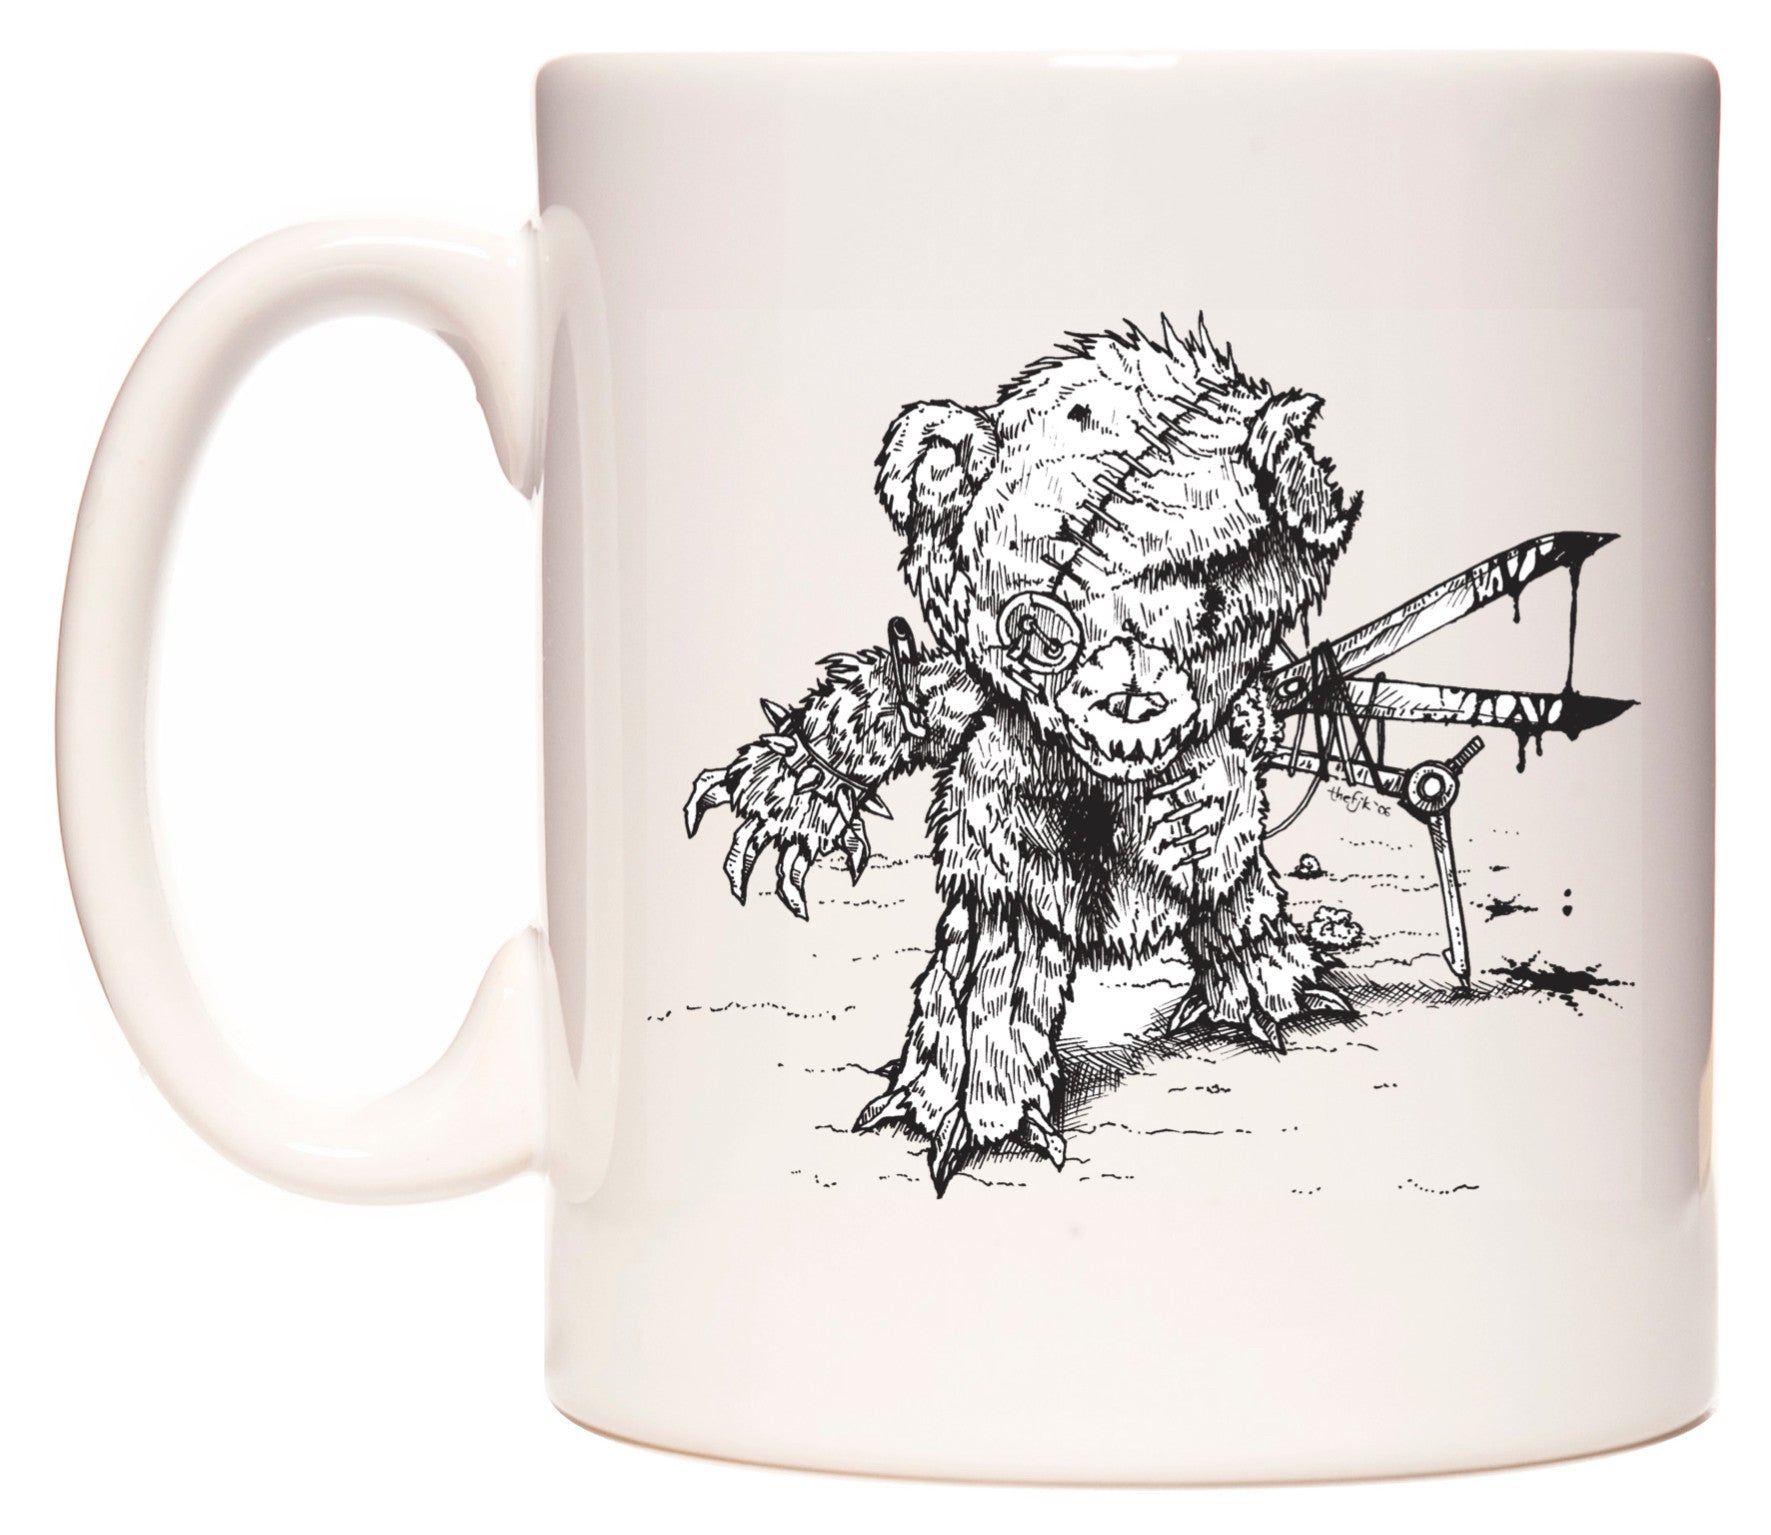 This mug features Evil Teddy in Black & White